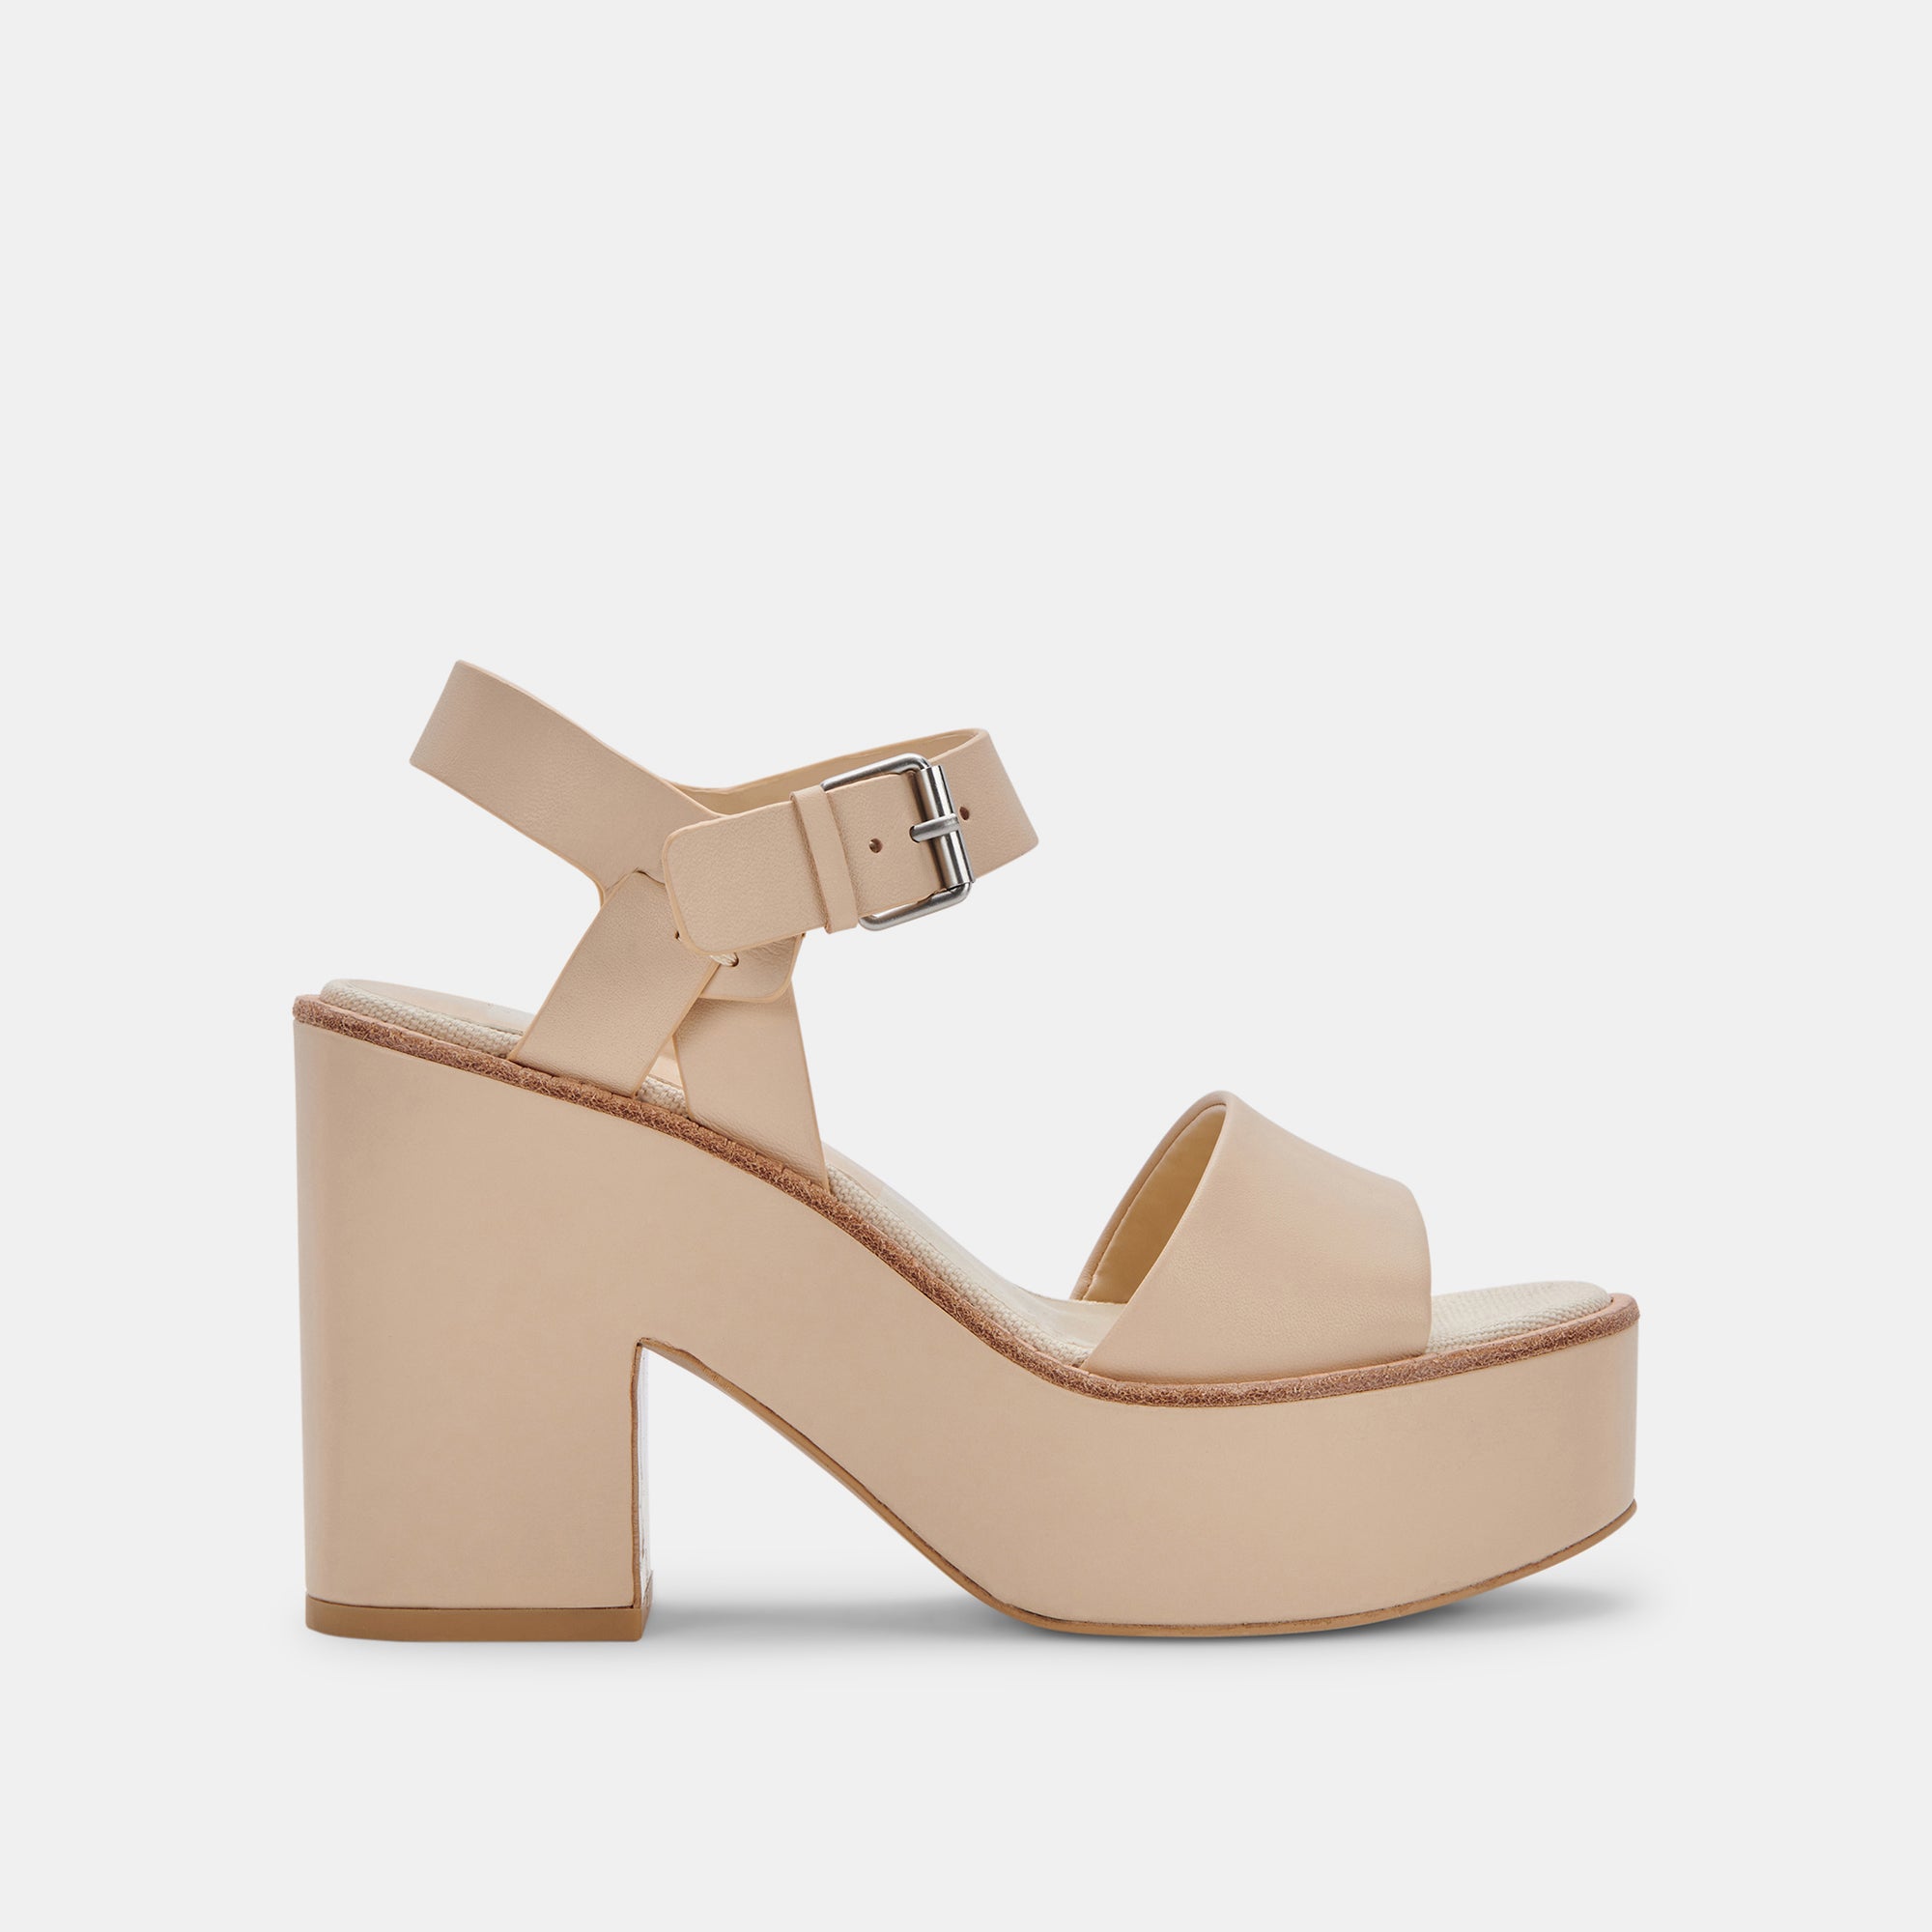 French Connection - Devi Cream Leather Wedges - scribblesfromemily.com